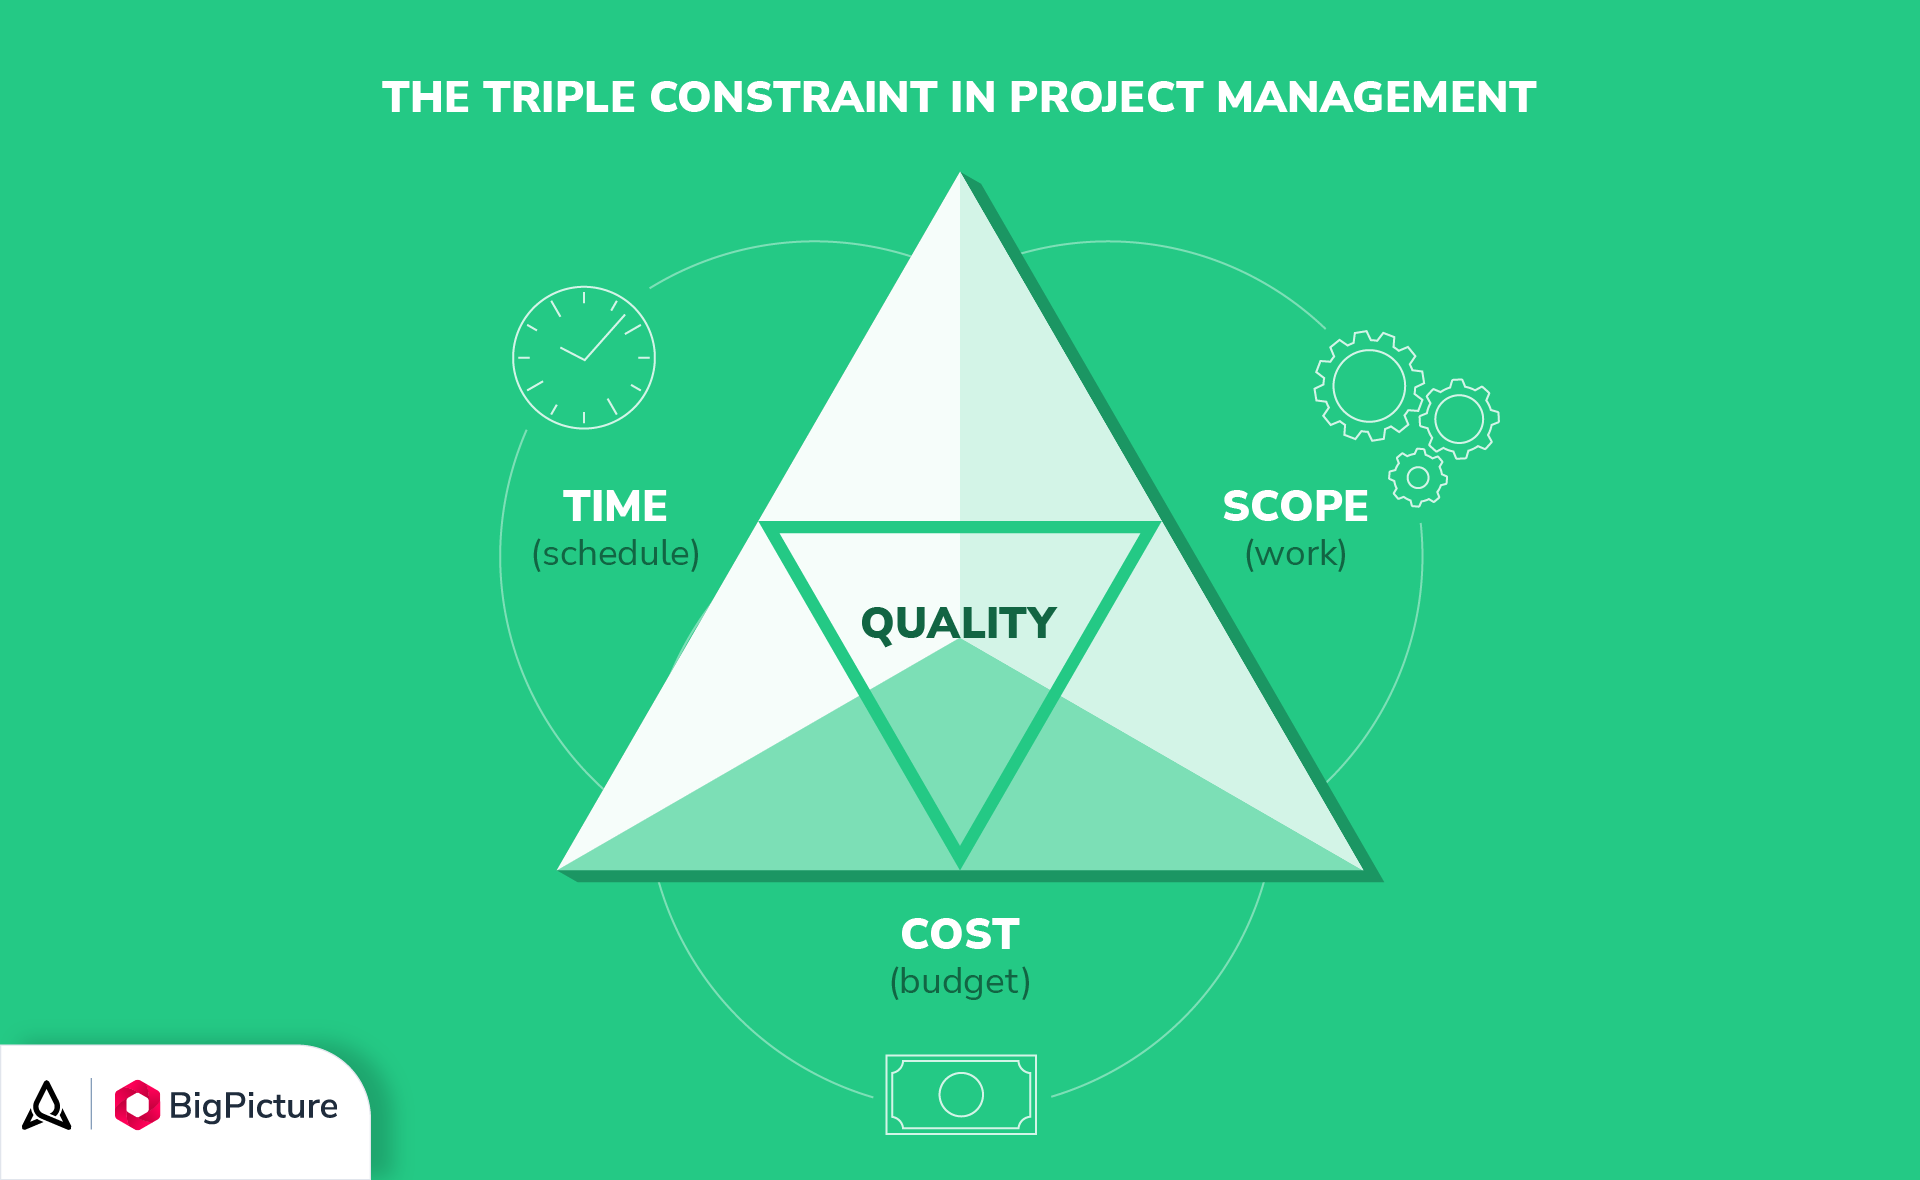 The triple constraint of project management: time, cost, and scope.